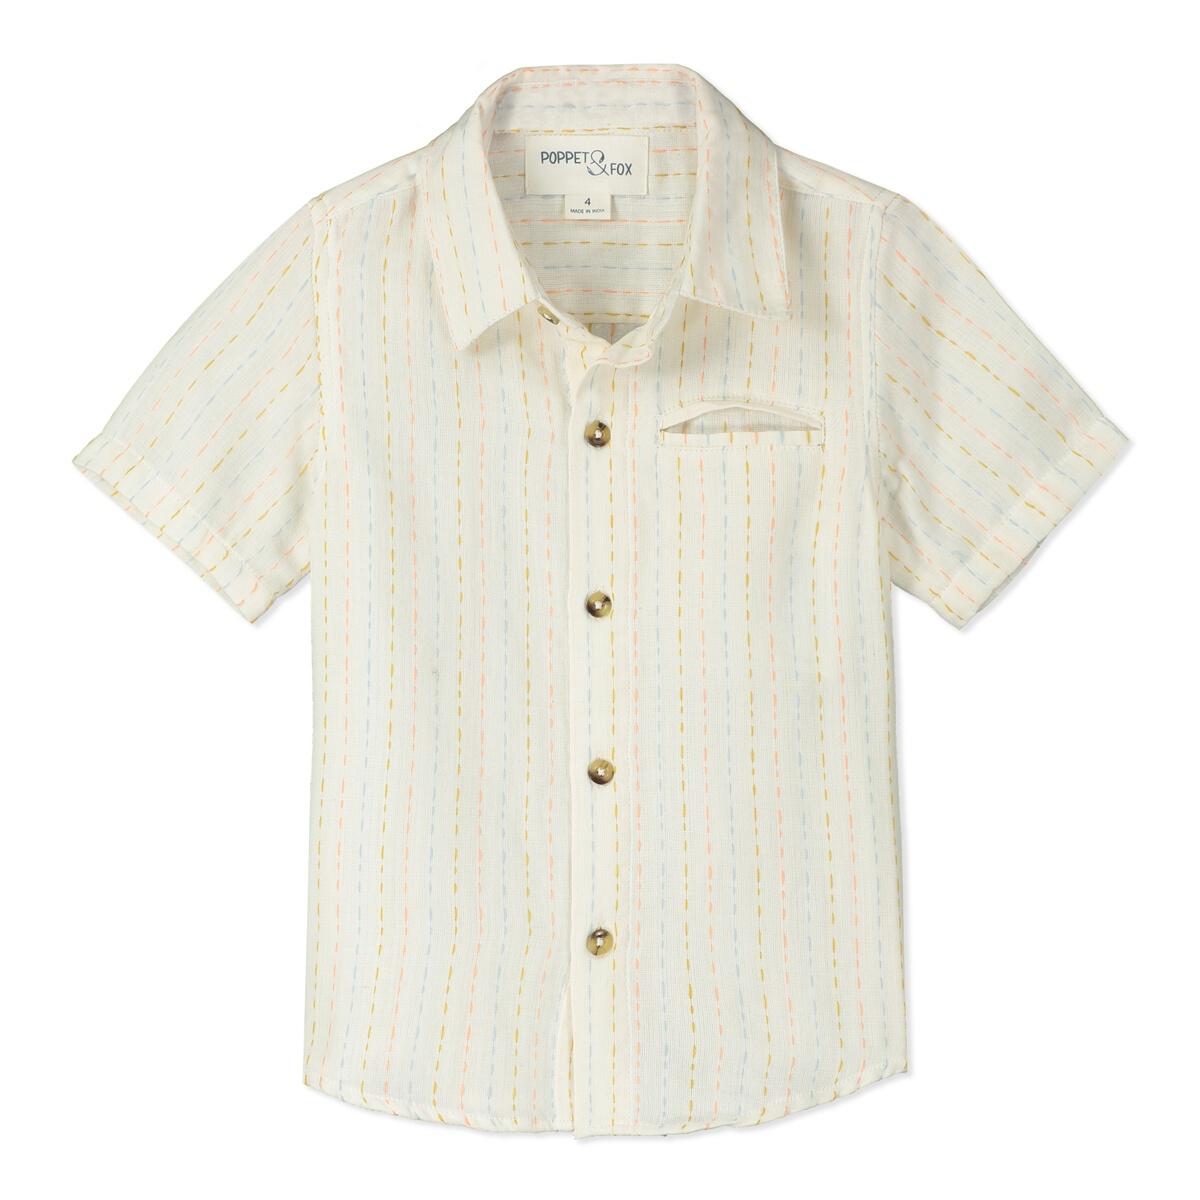 Sedona Stitched Button Down Shirt - Twinkle Twinkle Little One